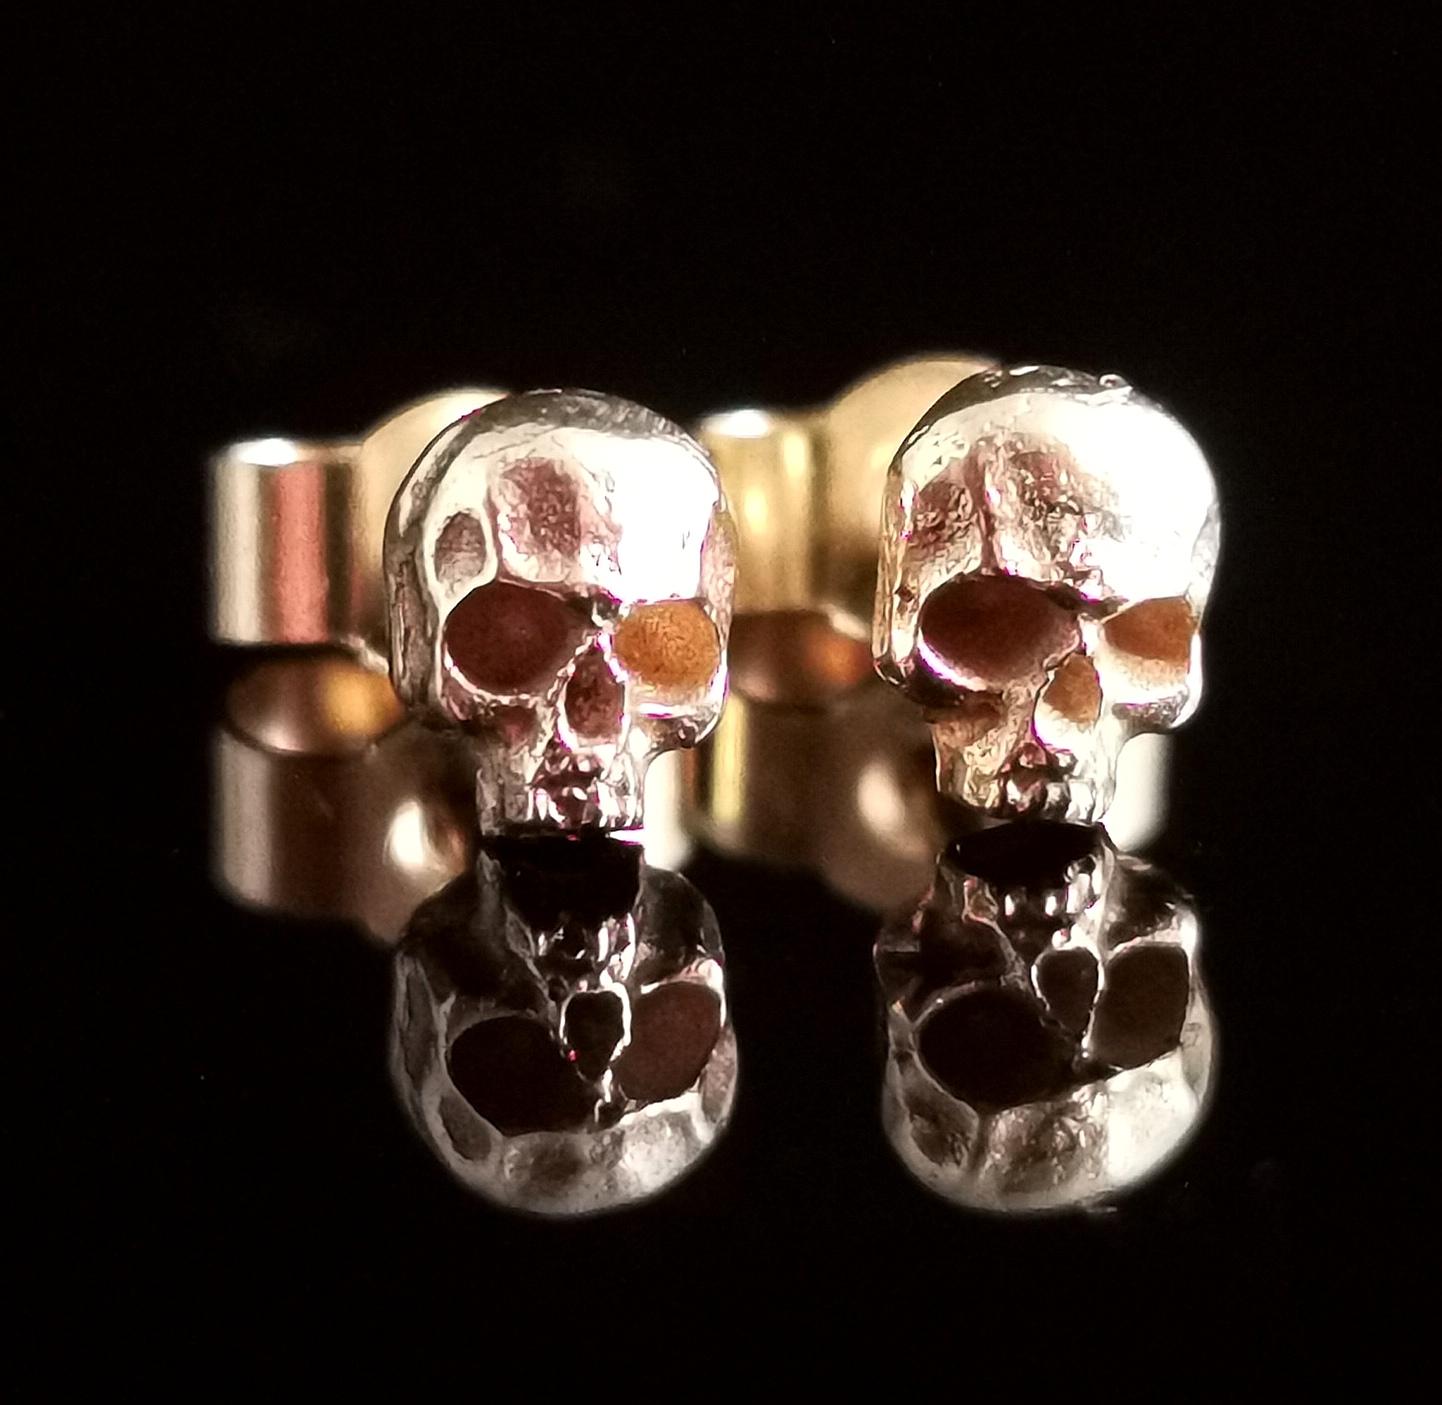 A fantastic, Dainty pair of vintage 9kt yellow gold skull earrings.

Crafted in solid 9kt gold they are designed as teeny tiny little skulls with realistic detailing each affixed to a 9kt gold Post.

They are both stamped 375 for 9ct gold.

This